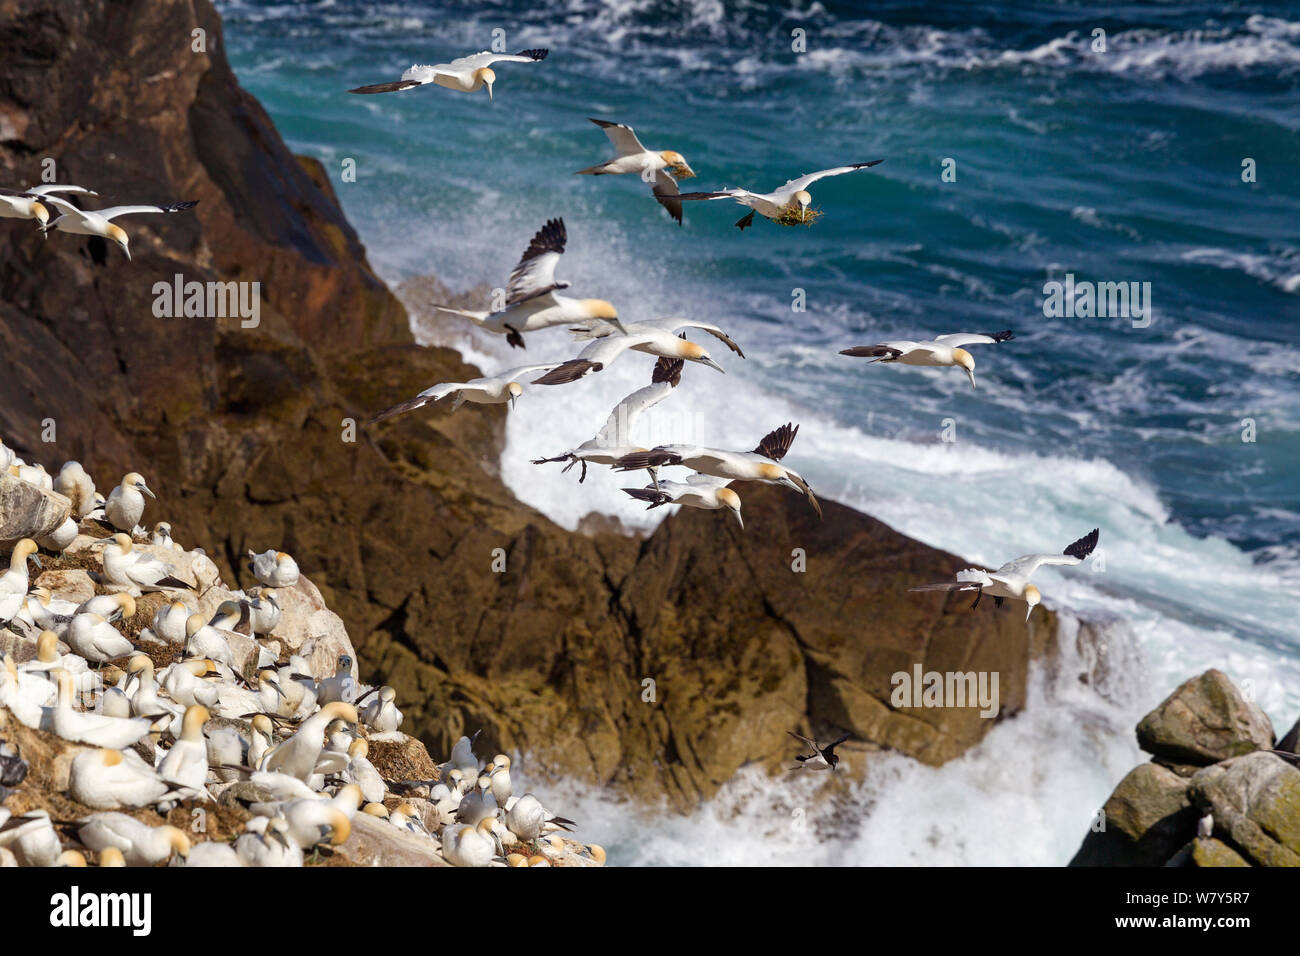 Northern gannets (Morus bassanus) hang in the air over the breeding colony full of activity. Great Saltee, County Wexford, Ireland. July. Stock Photo